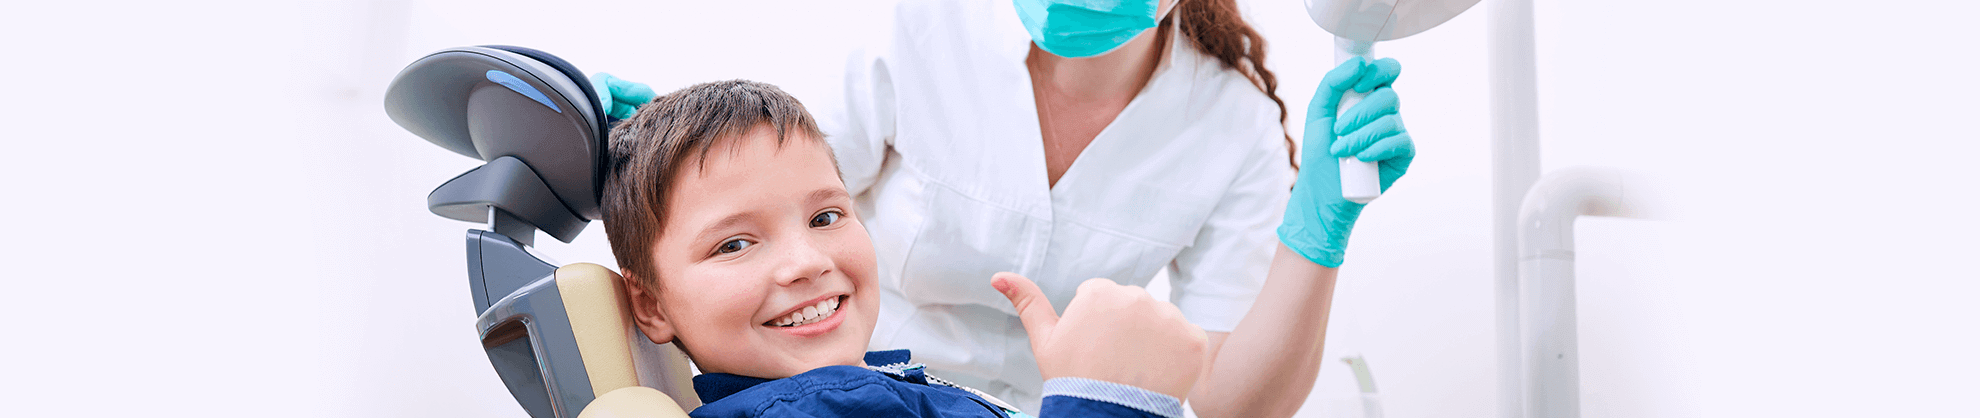 services-family-dentistry-1